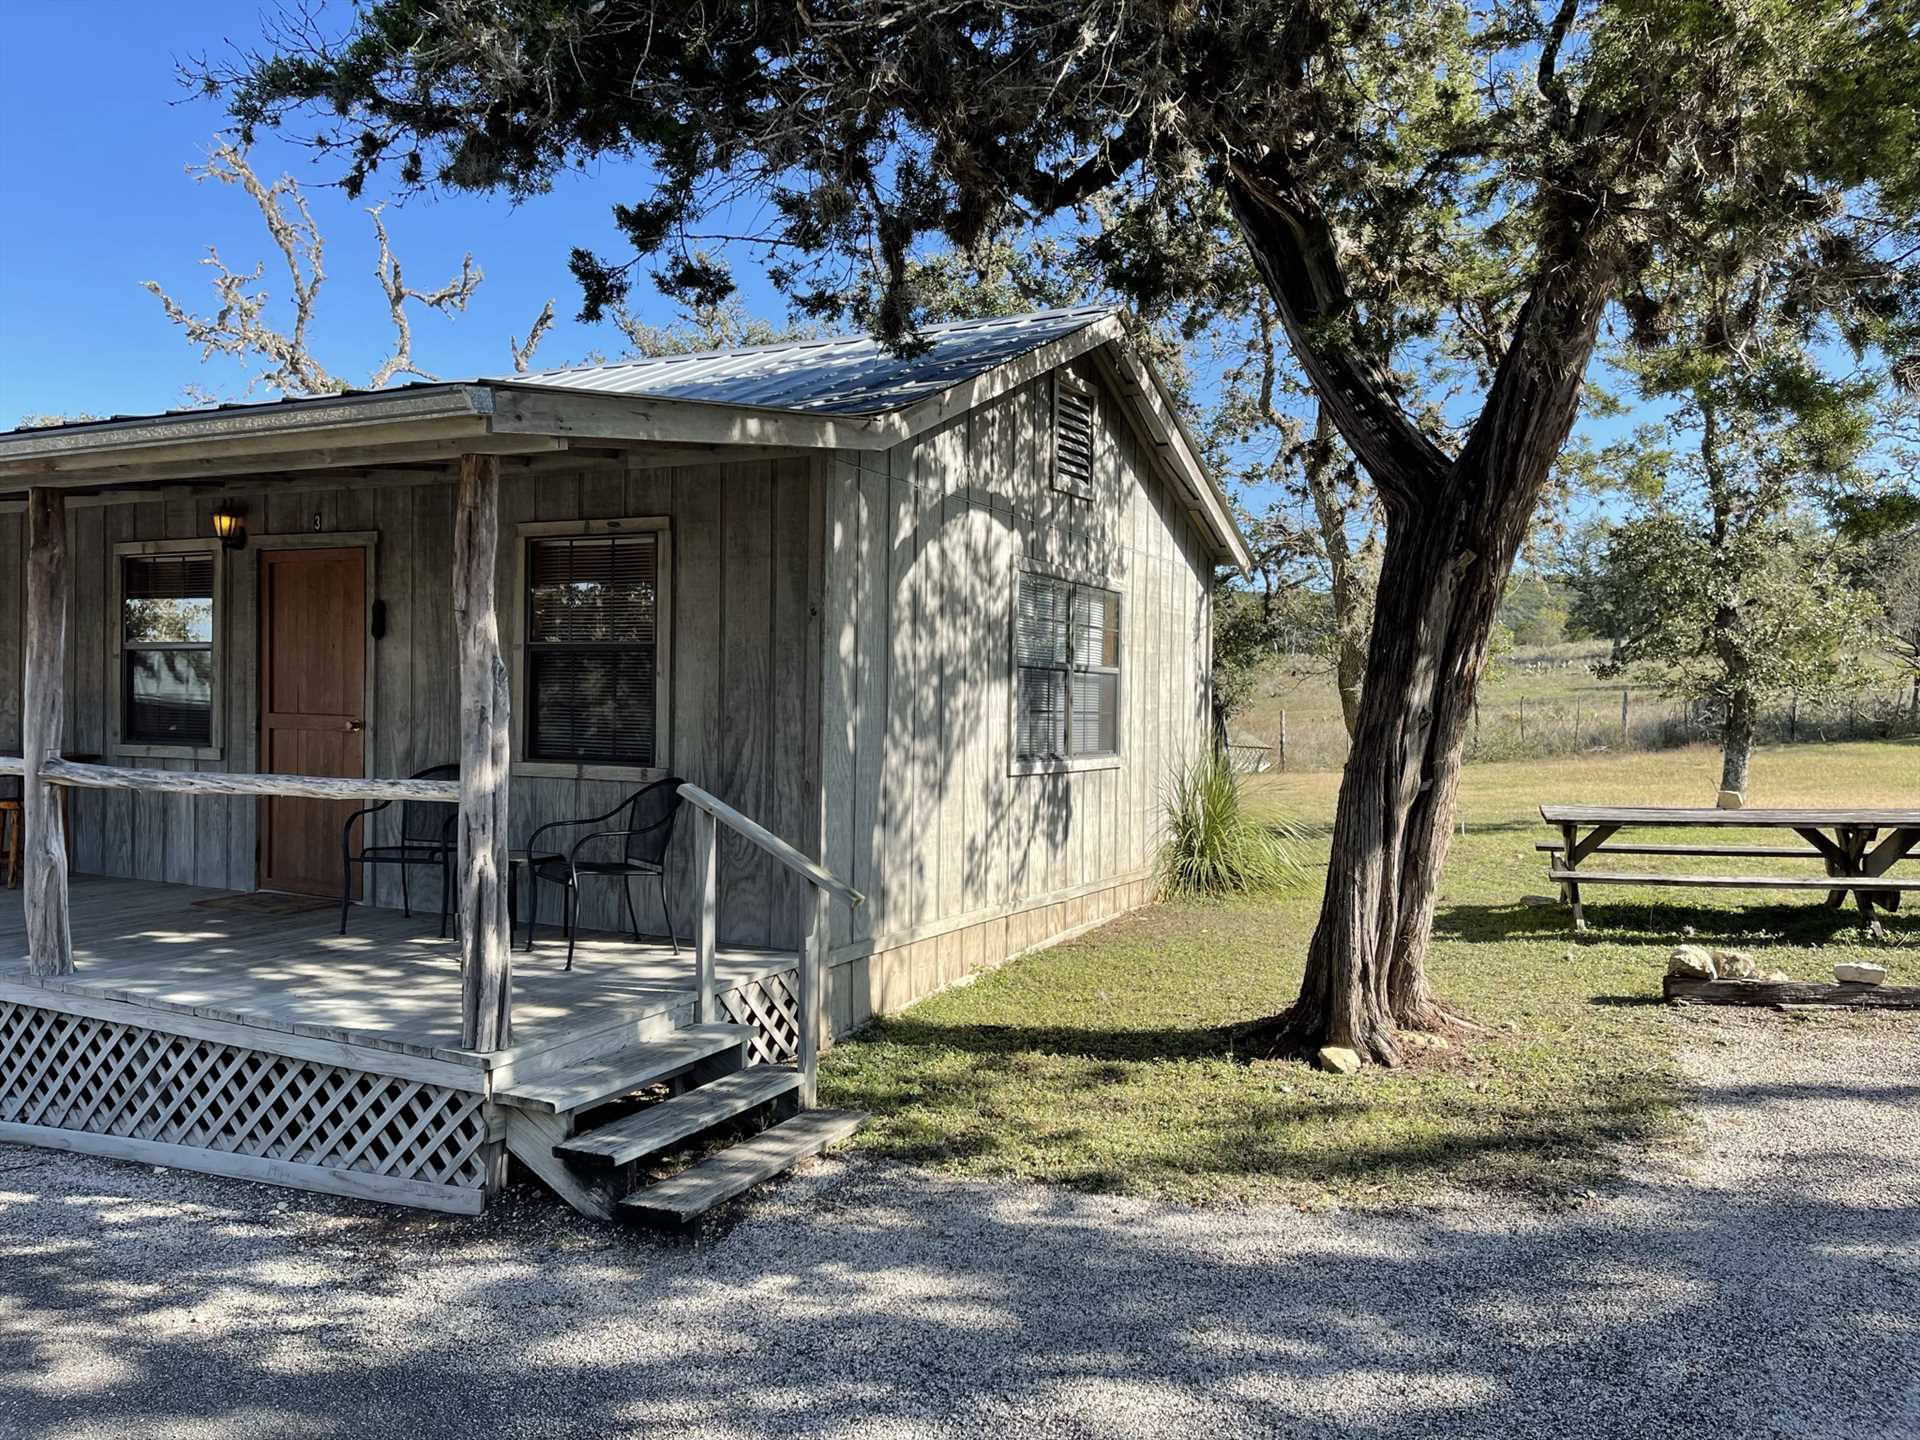                                                 Soak in those Hill Country views on the shaded deck, complete with comfy outdoor furniture.